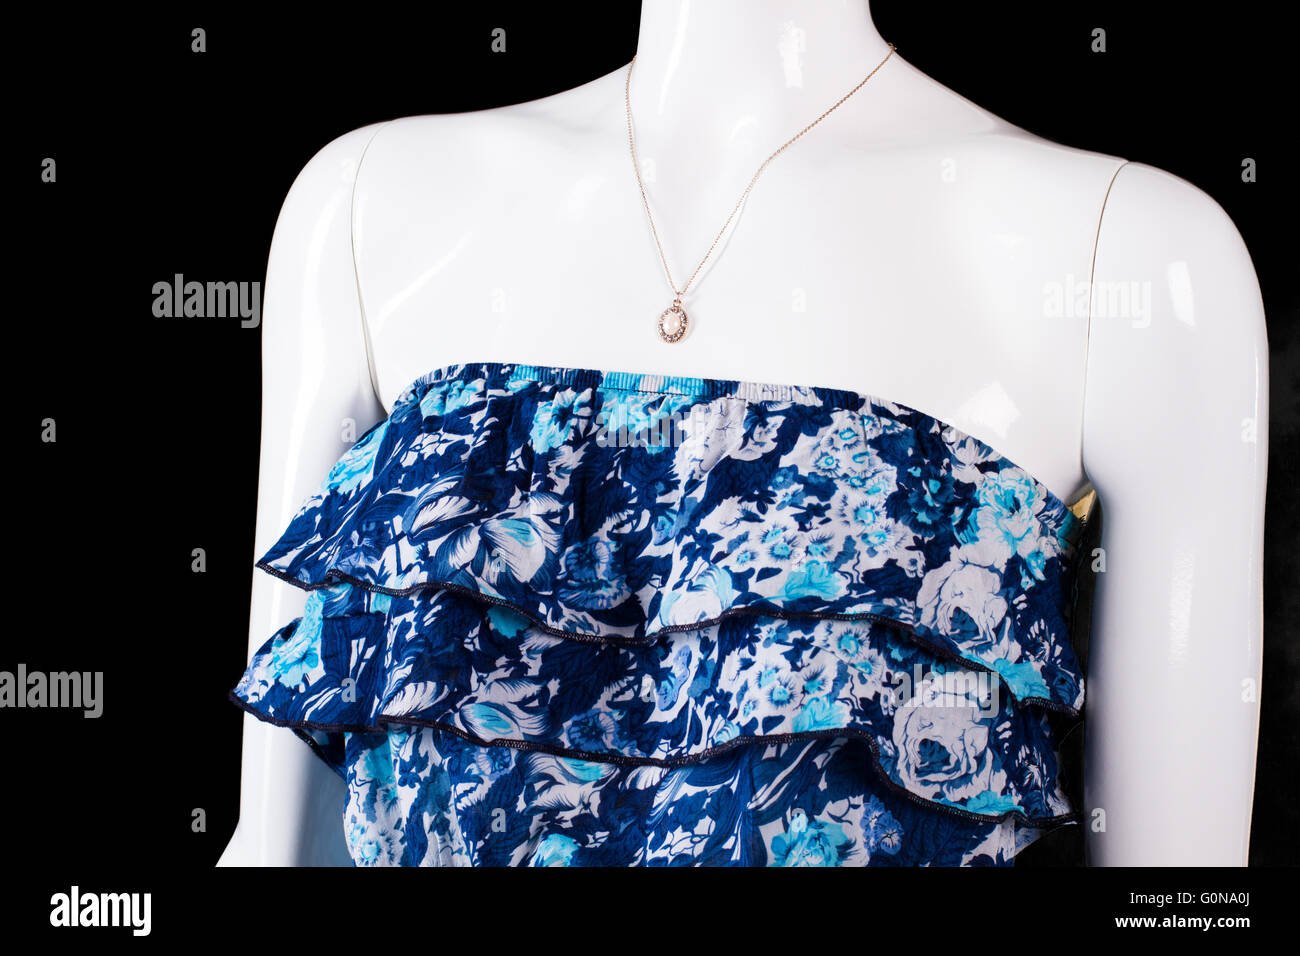 Strapless blue dress and pendant. Stock Photo